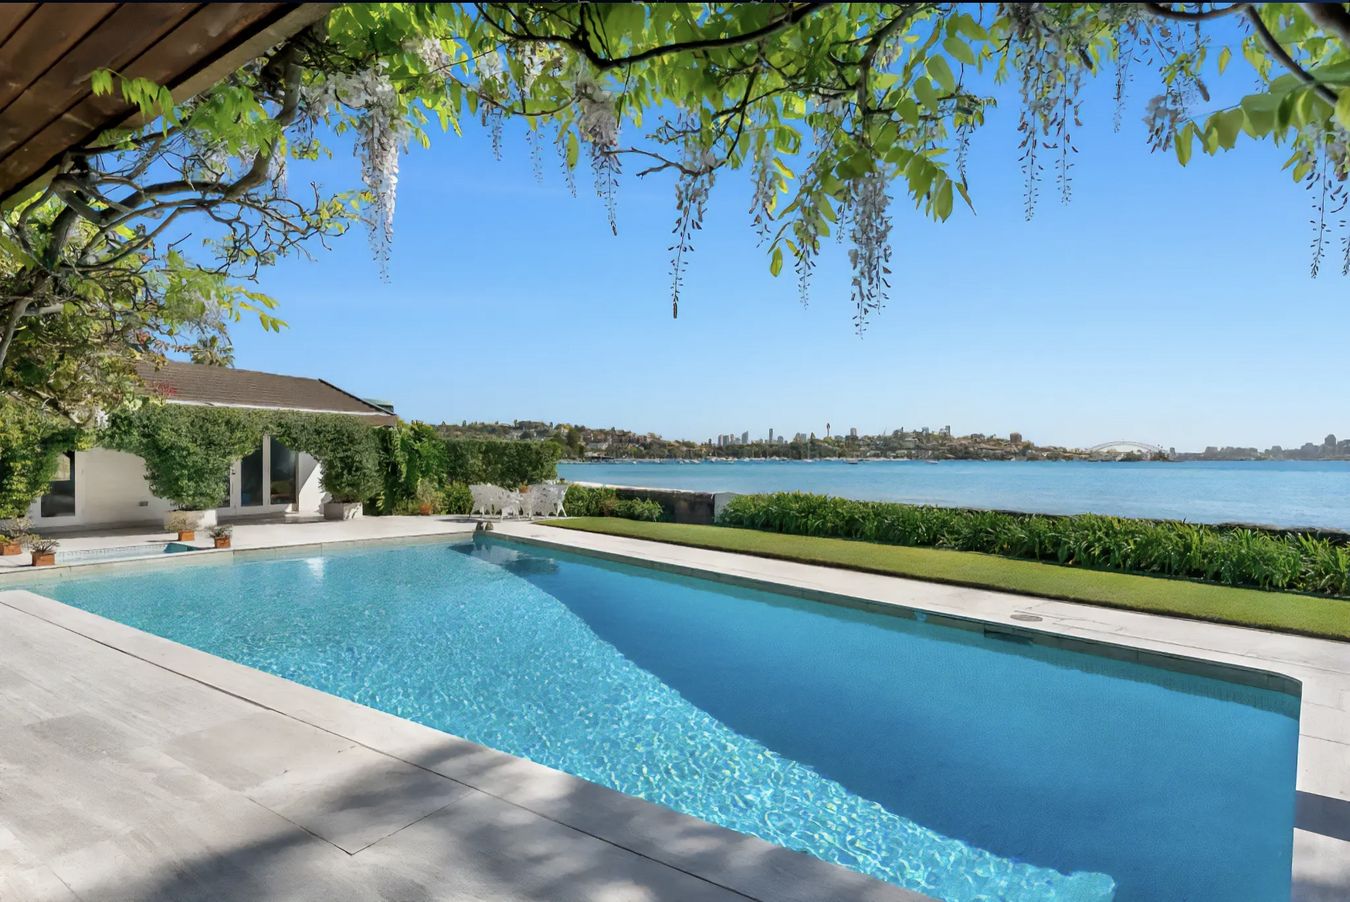 This house was sold by John Singleton for $840,000. It’s now asking $85m - Domain